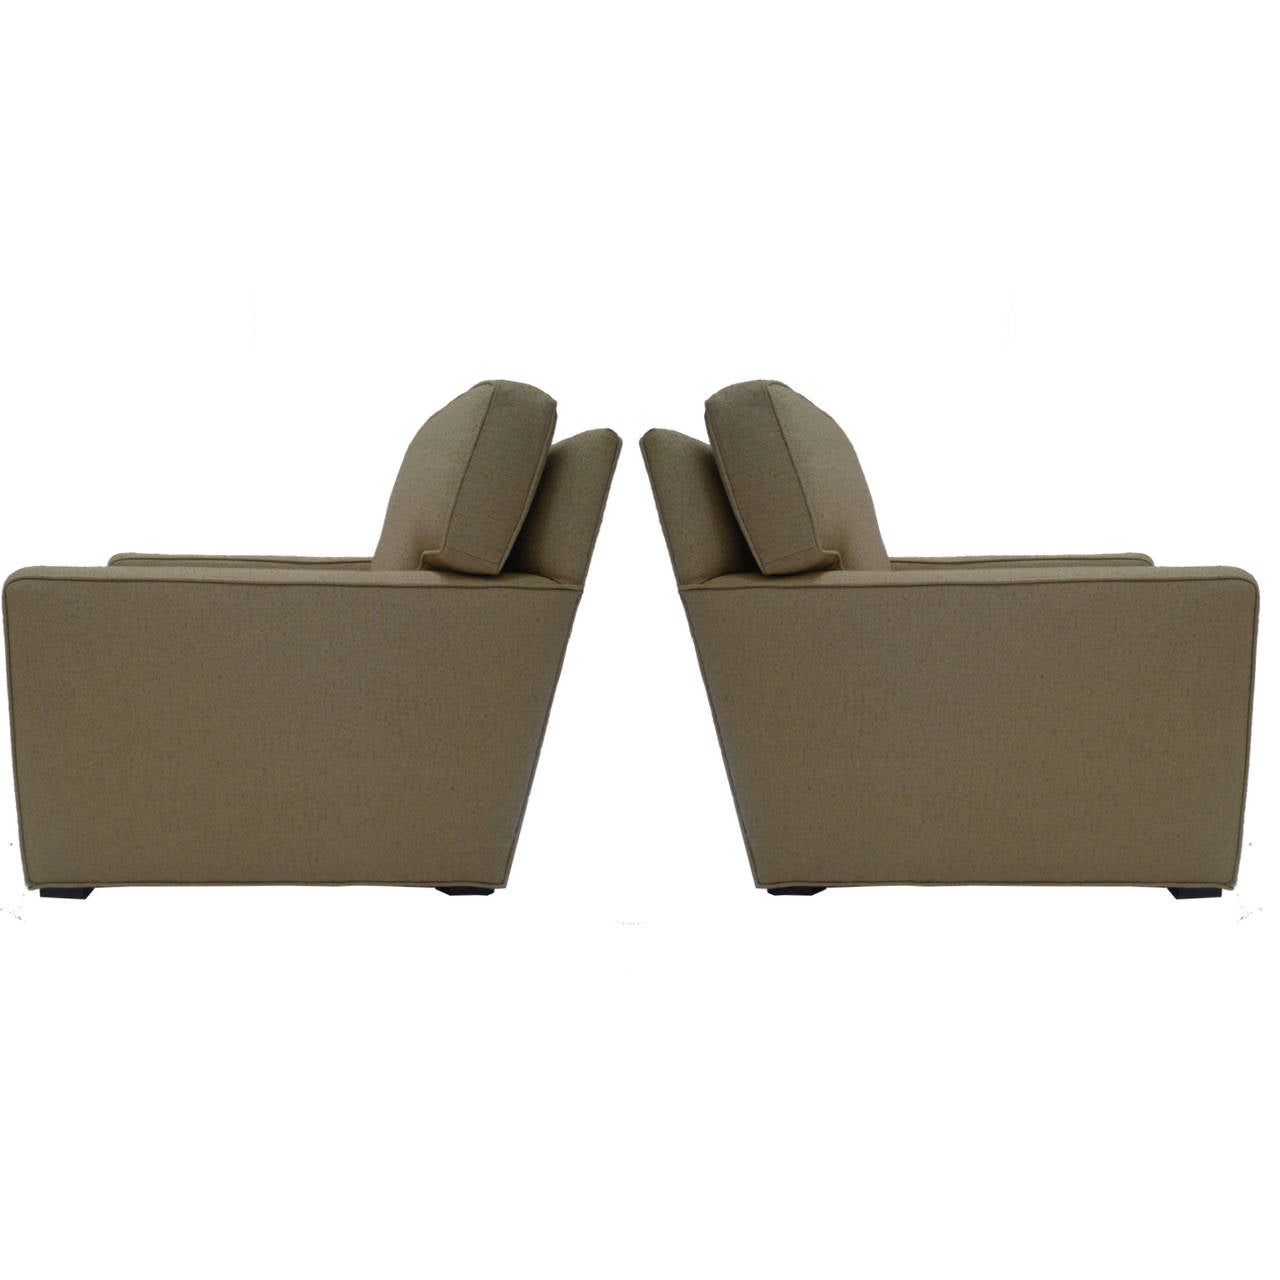 Pair of freshly upholstered Art Deco lounge chairs with ebonized wood feet. Transitional style goes well in almost any setting. Quite comfortable. Sturdy neutral upholstery.